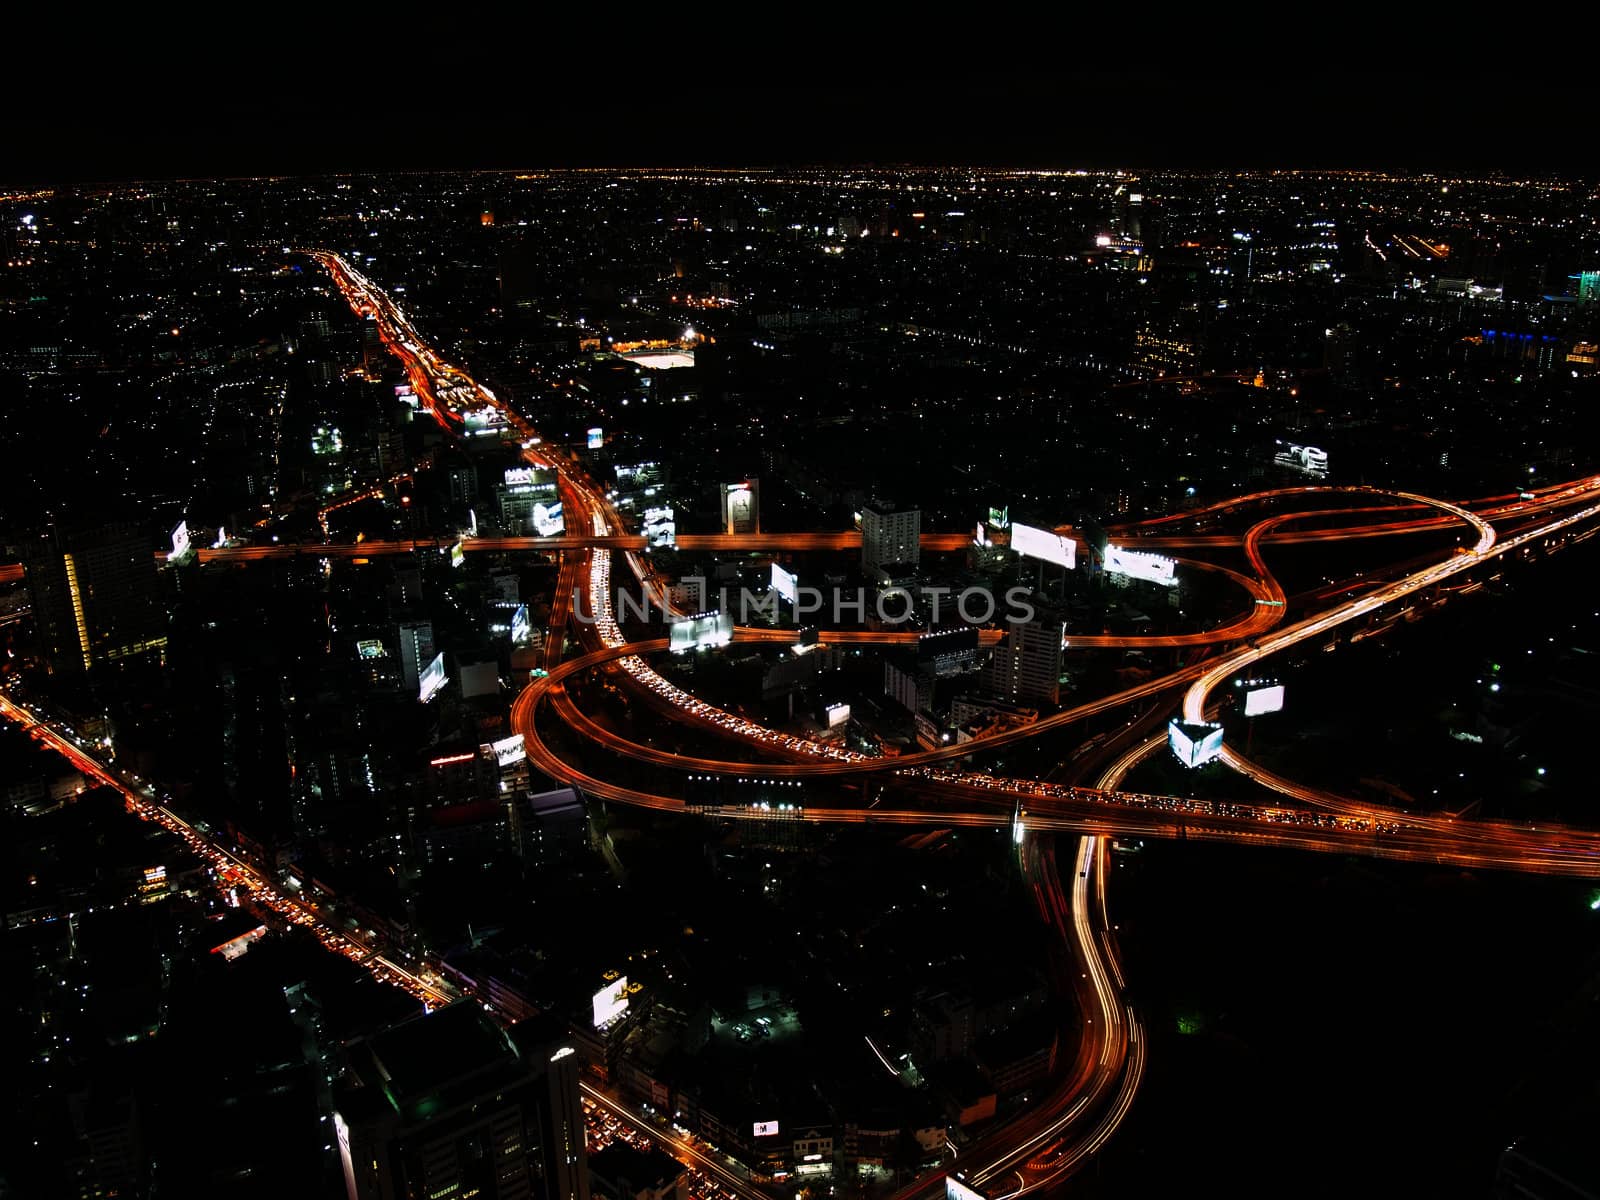 Fast road network in Bangkok at night by rzoze19